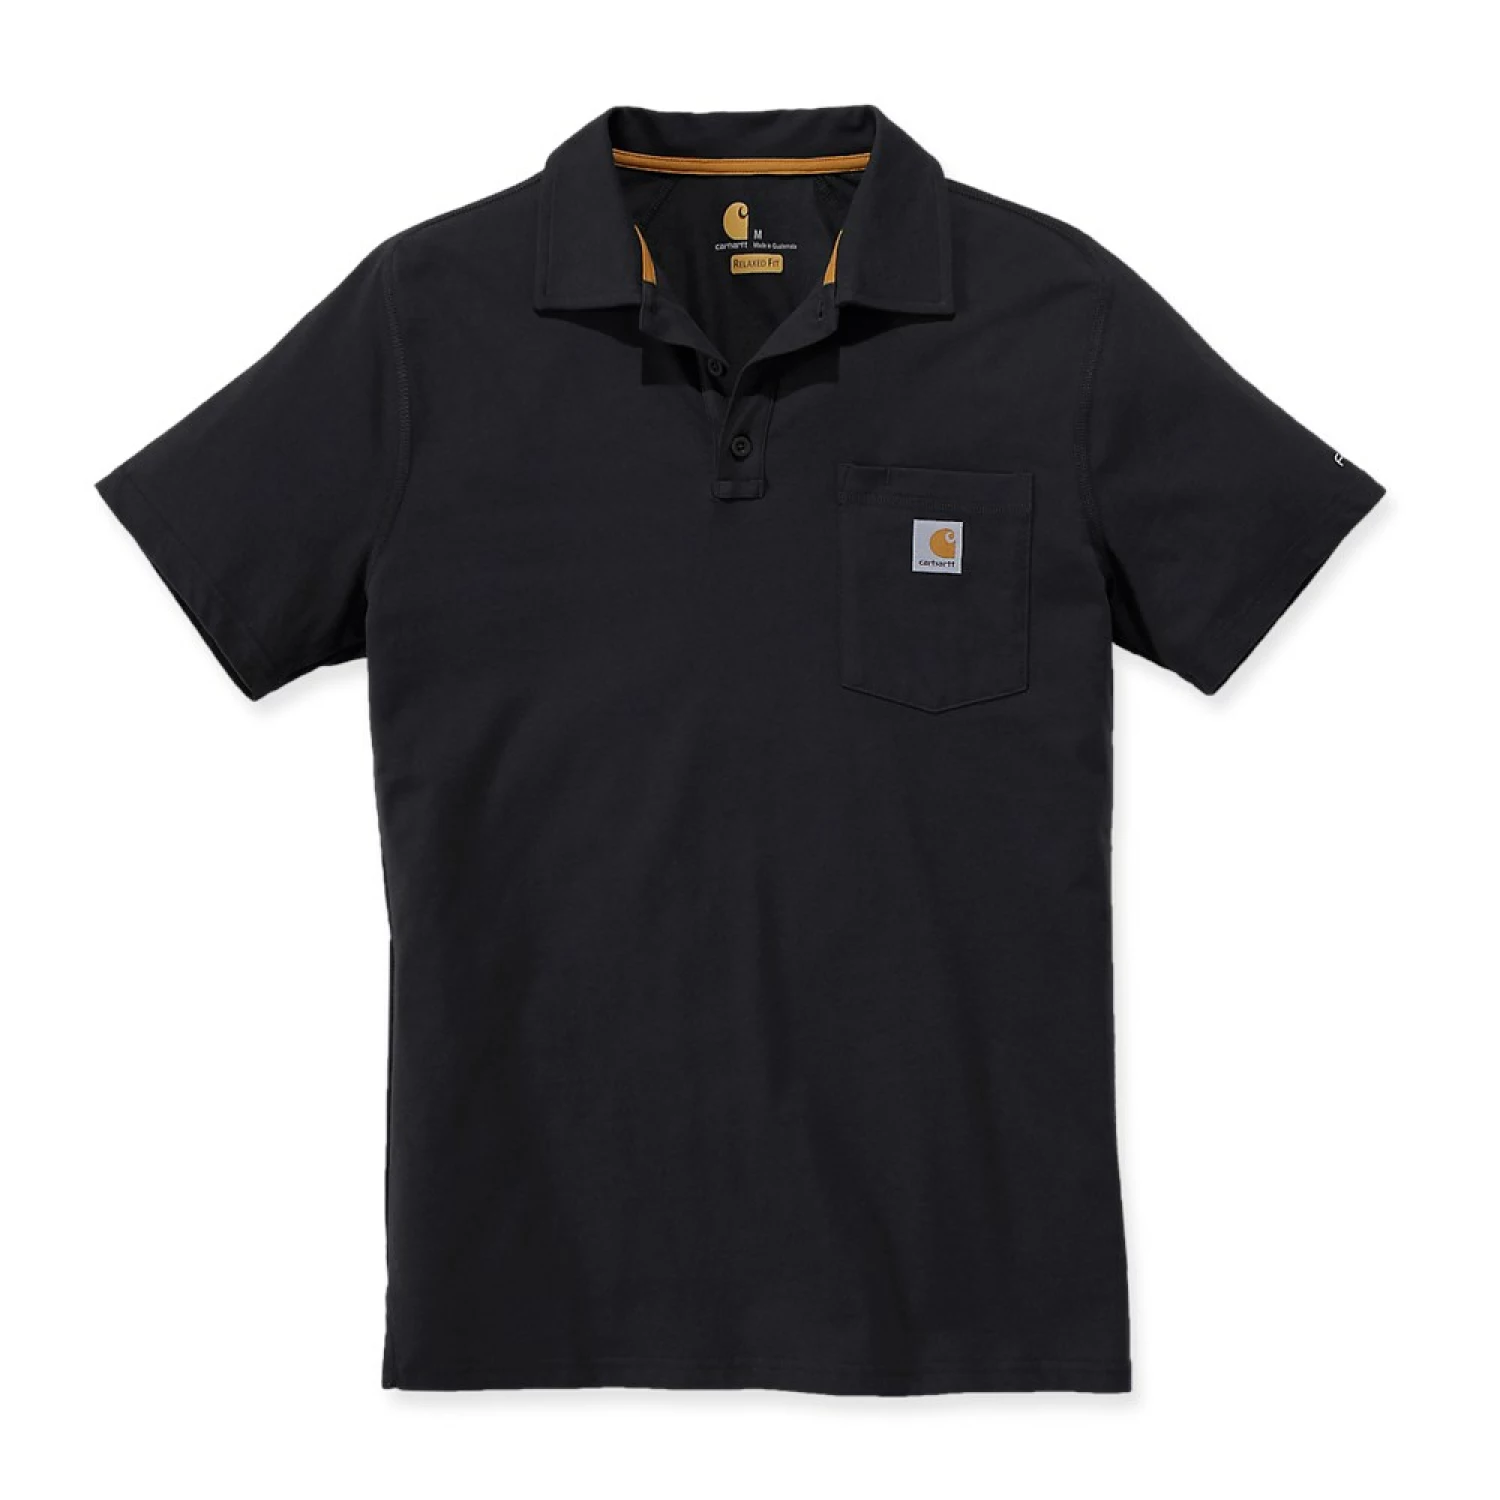 Carhartt 103569 Force Cotton Delmont Pocket Polo - Relaxed Fit - Black - M-image